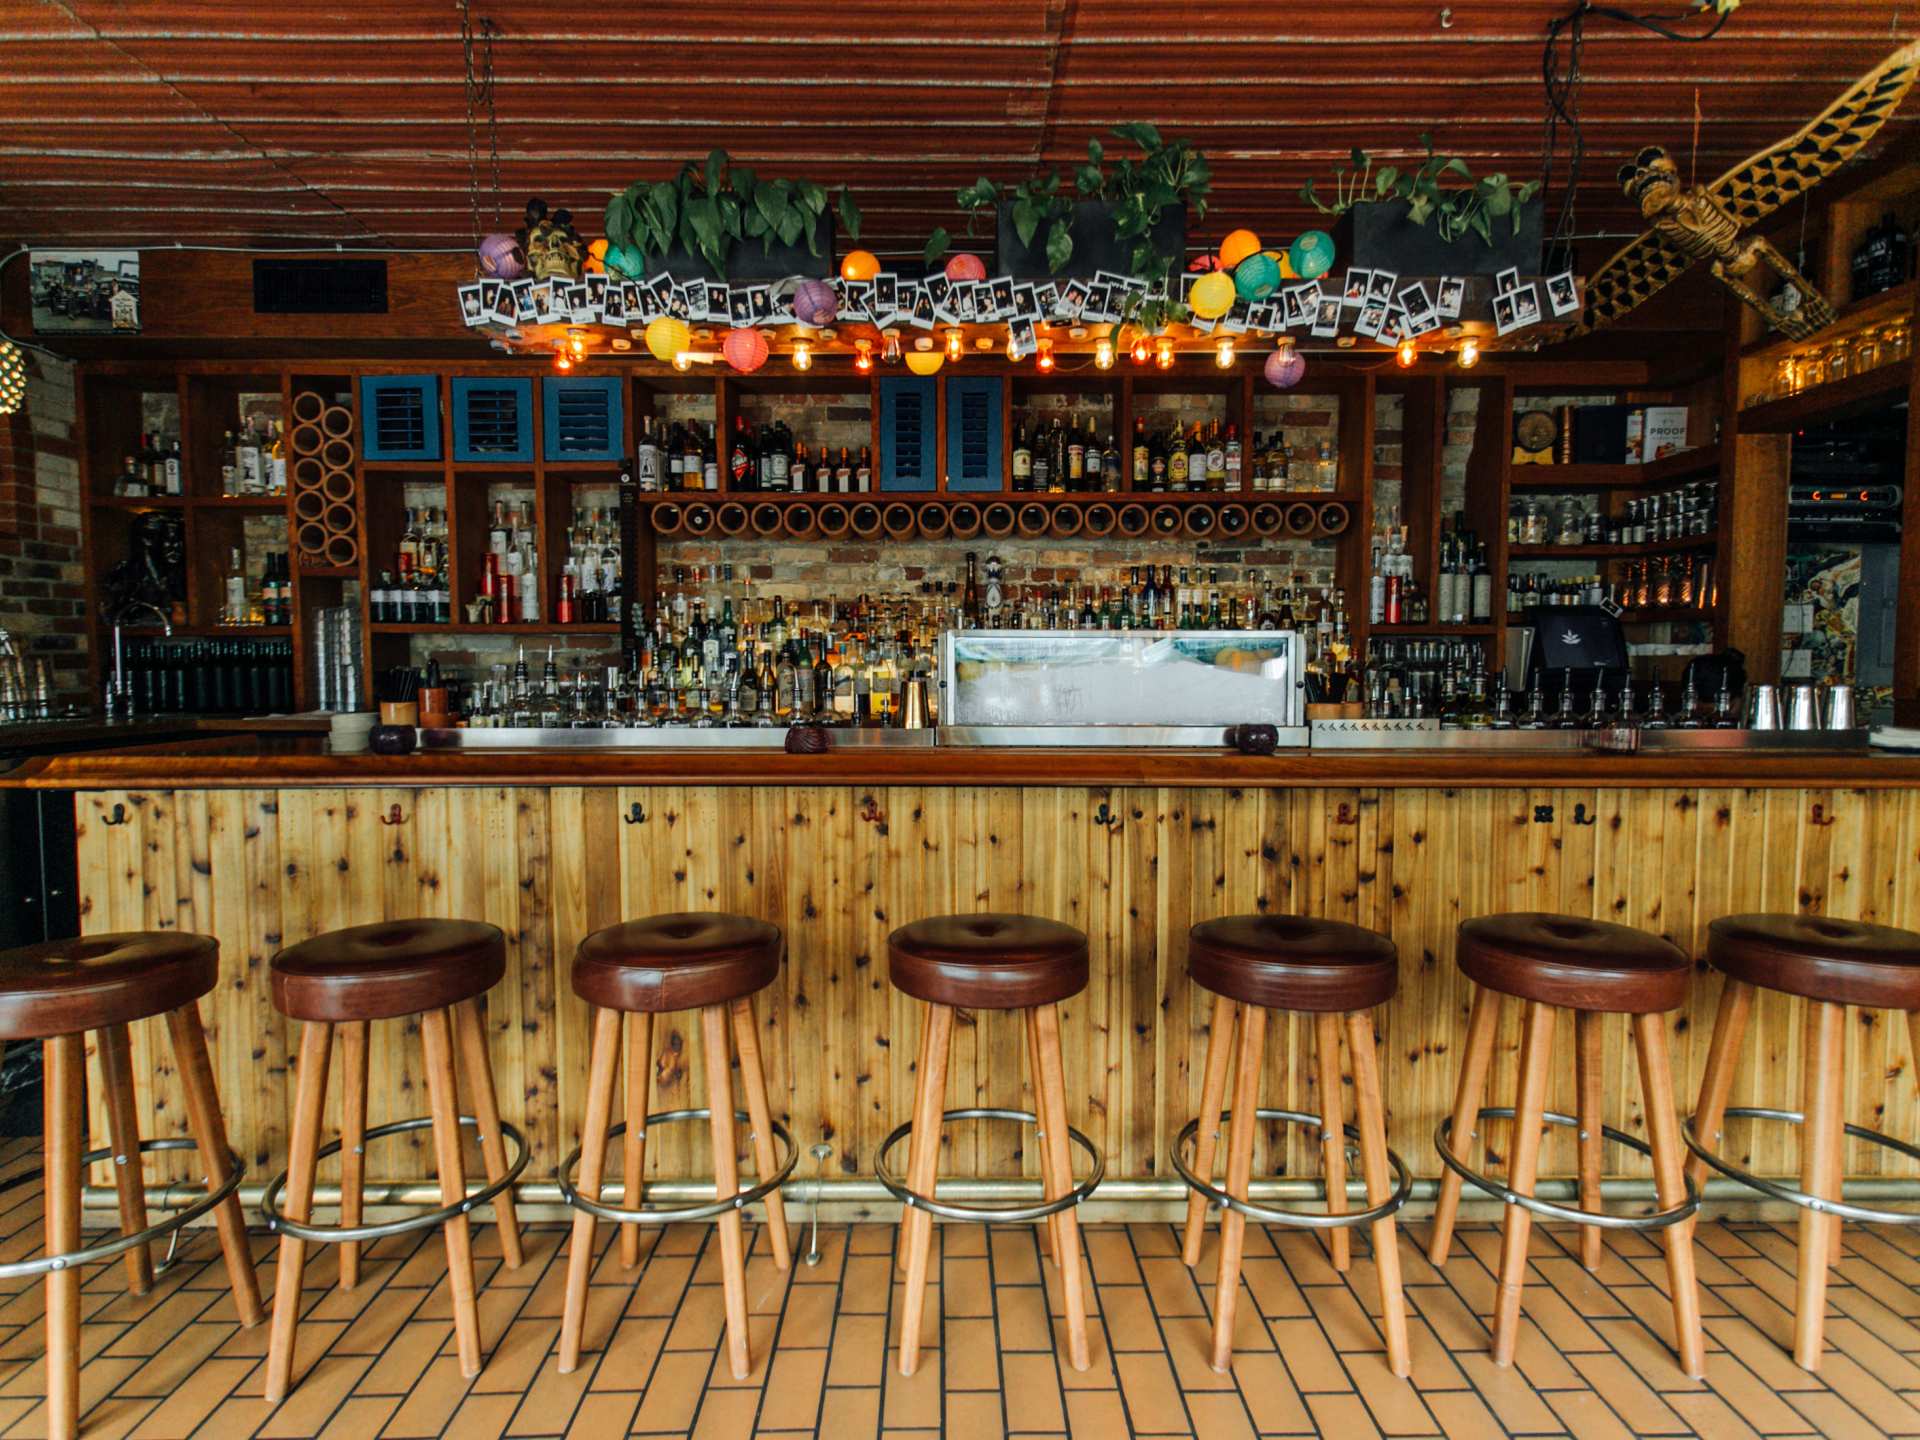 Late night eats in Toronto | The wooden bar with bar stools at El Rey in Kensington